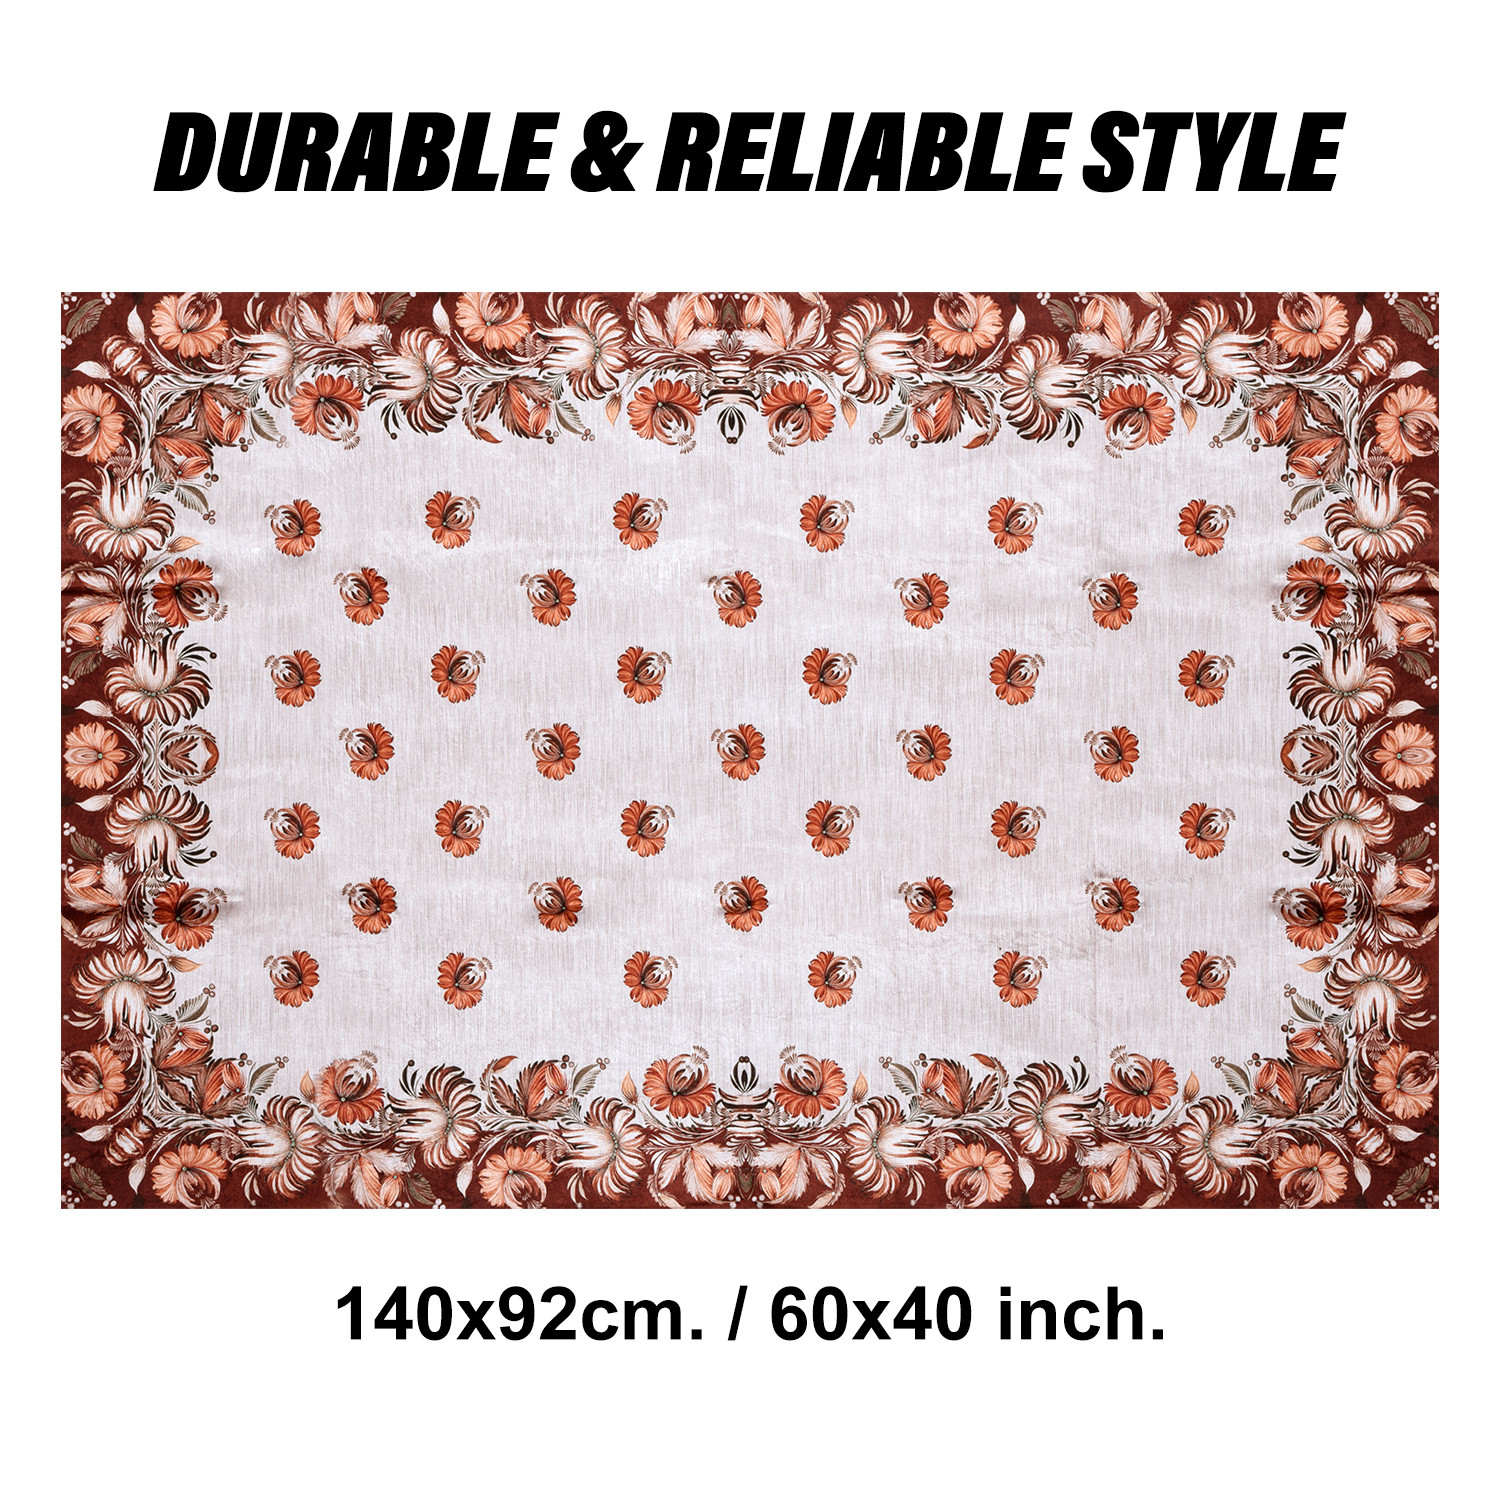 Kuber Industries Center Table Cover | Velvet Sparkle Table Cover | Brown Digital Flower Table Cover | Reusable Cloth Cover for Table Top | Table Protector Cover | 40x60 Inch | Cream